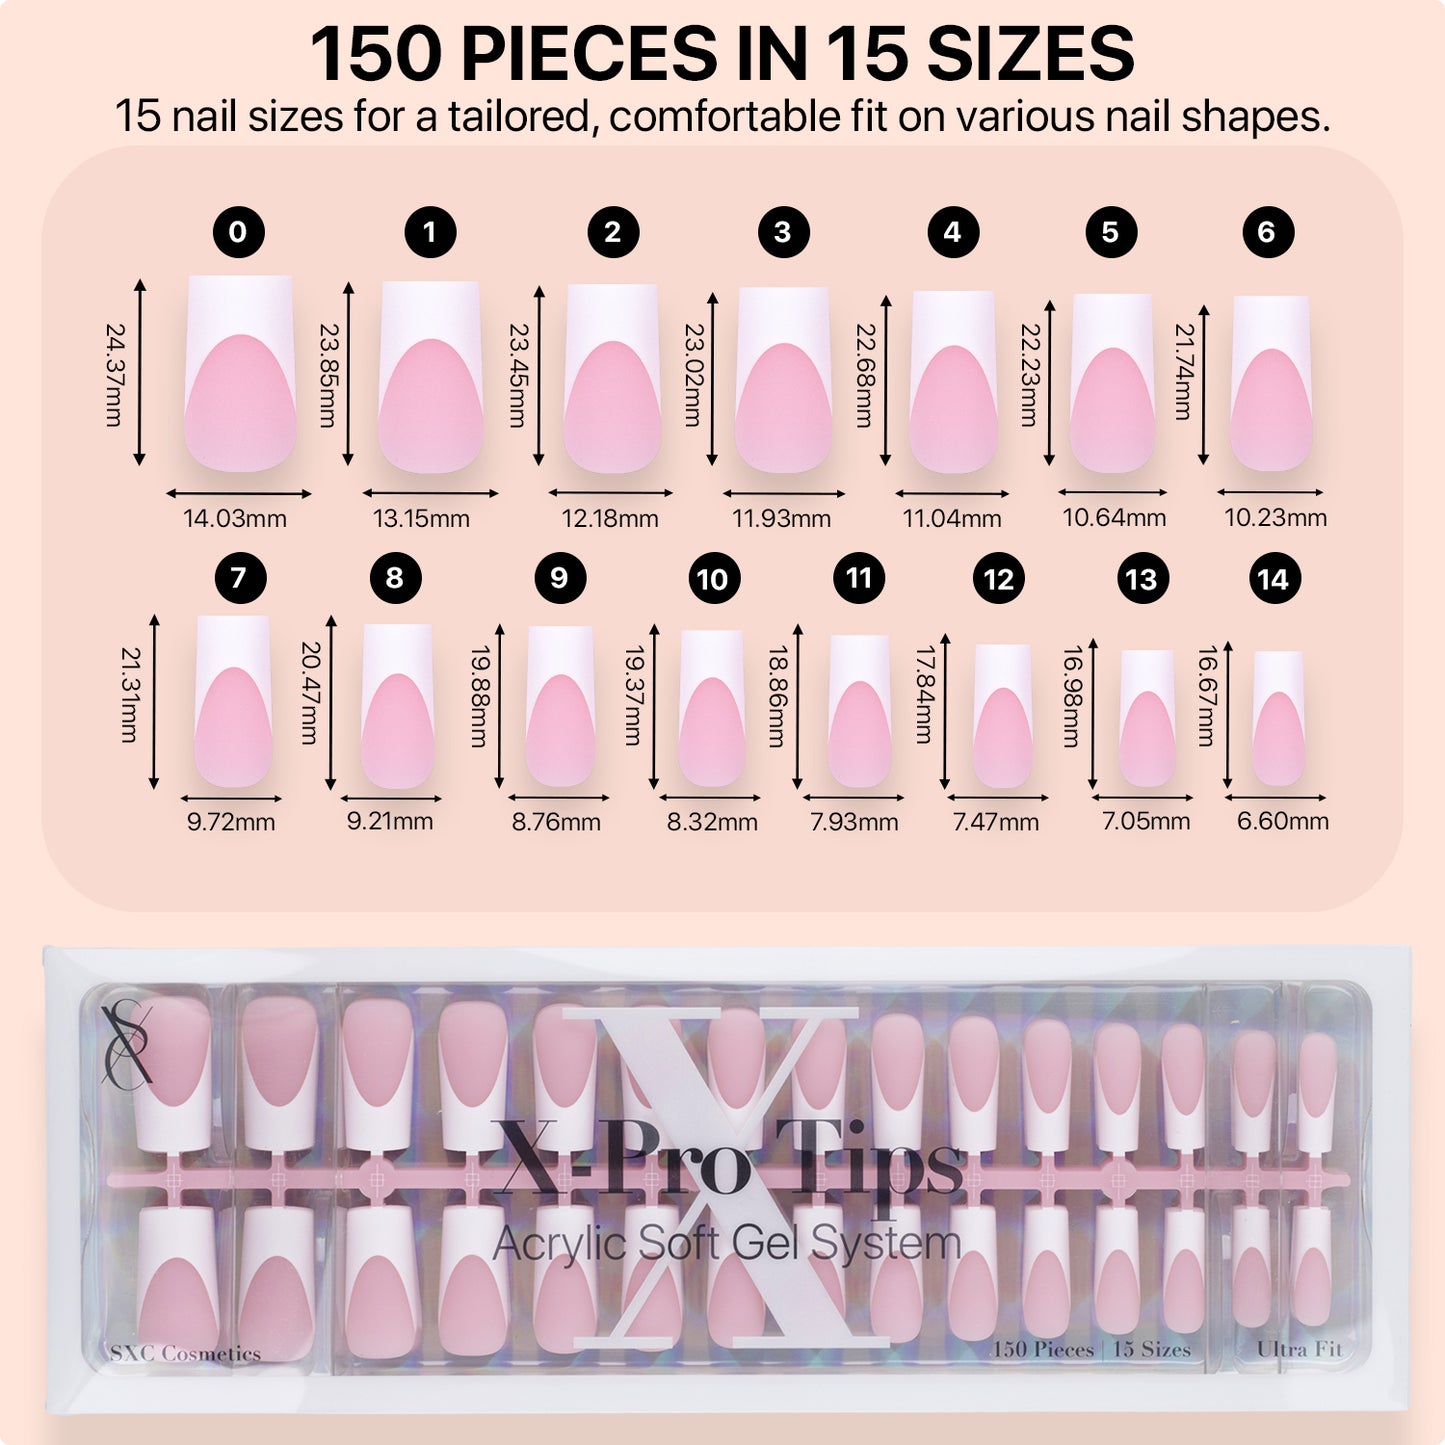 SXC Cosmetics X-Pro Tips Press on Nails, Pink Medium Square French Tips, 150 Pieces in 15 Sizes Ultra Fit Acrylic Soft Gel System